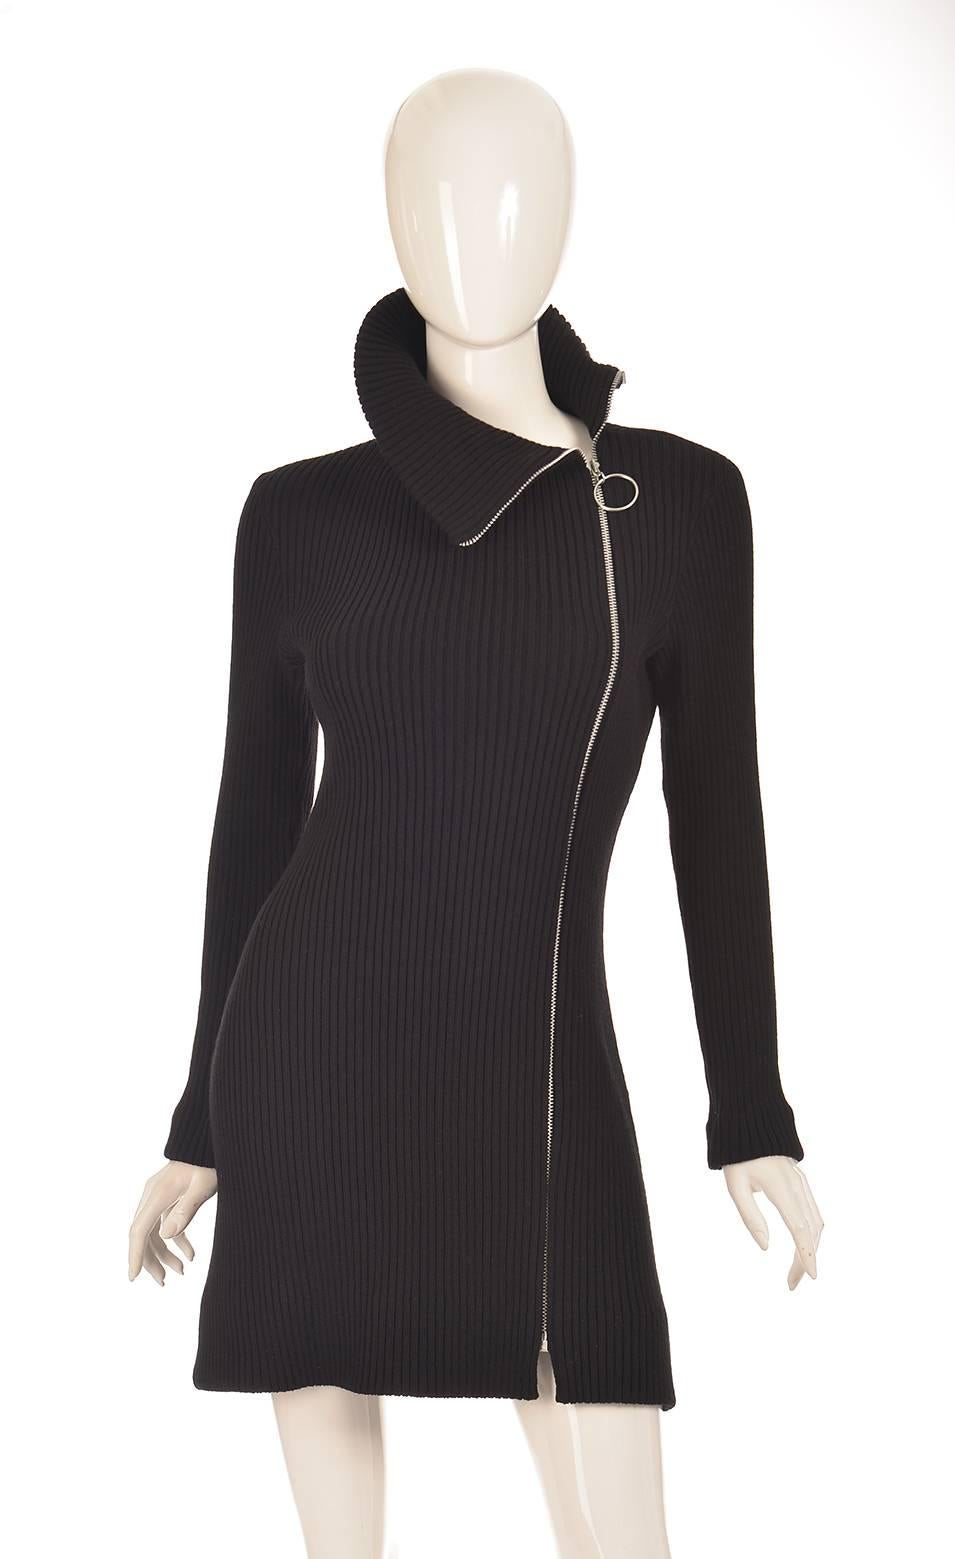 
This iconic, rib knit dress by Rudy Gernreich for Harmon Knitwear is 100% wool, and features a Talon zipper that runs the full length of the dress. The zipper is located left-of-center and can be zipped up to the top of the neck or left completely